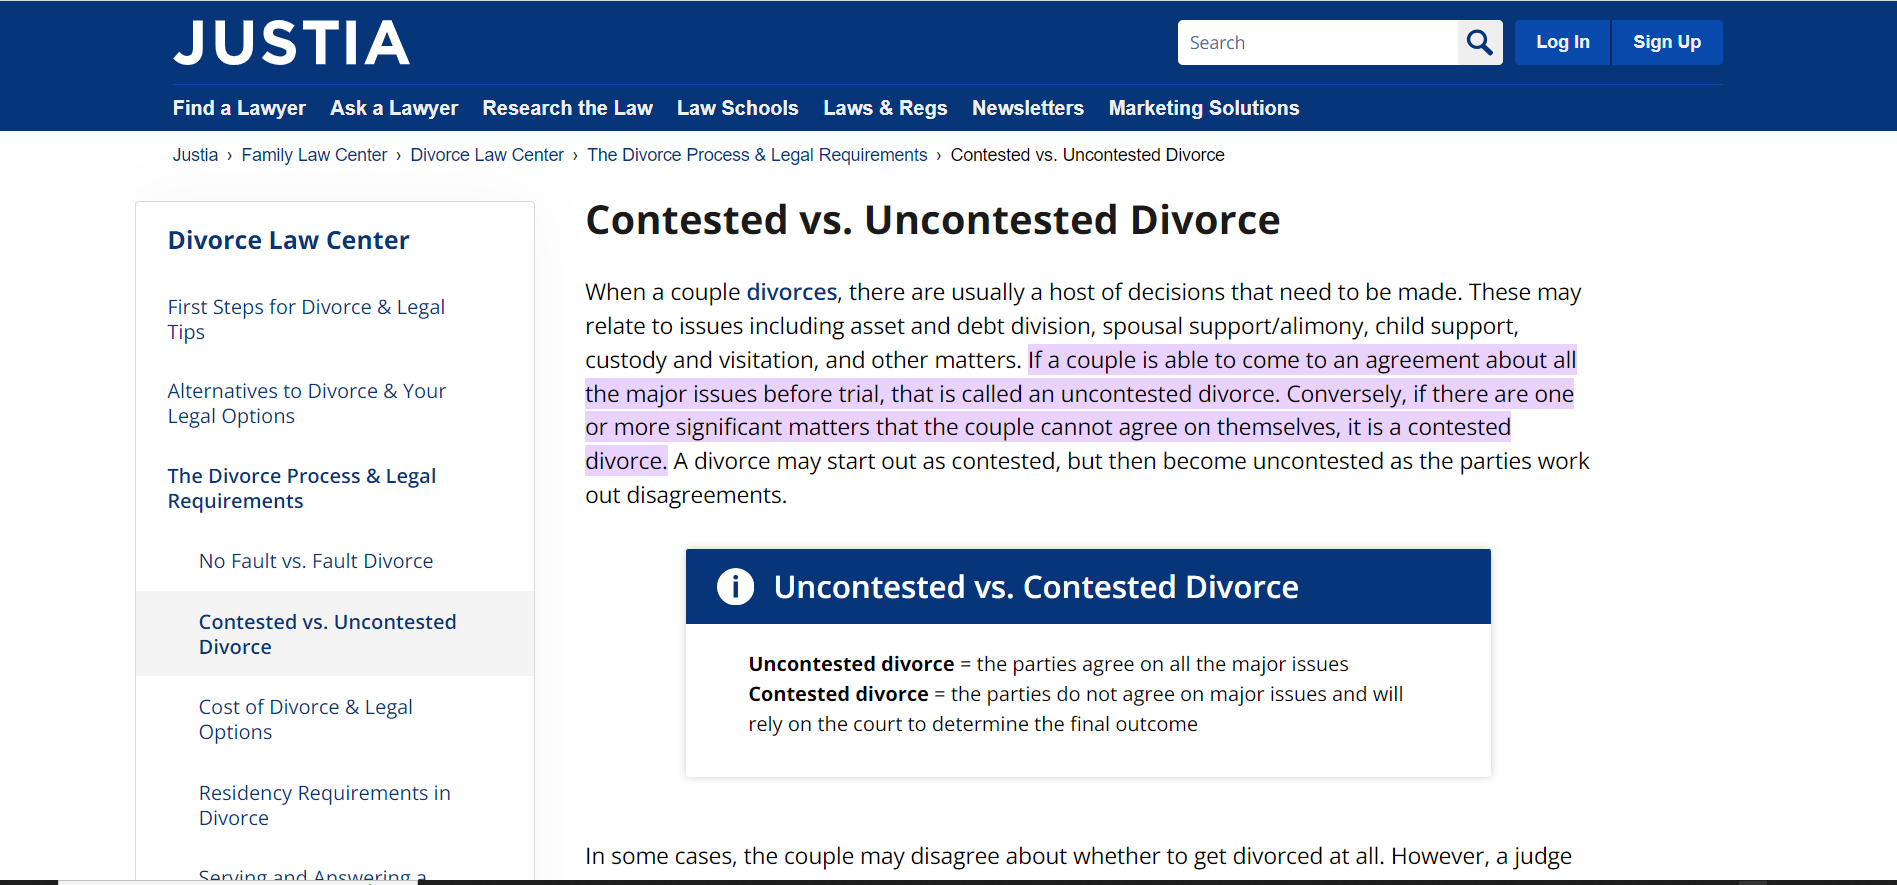 screenshot of Website page detailing the differences between contested and uncontested divorce proceedings in marriage dissolution.